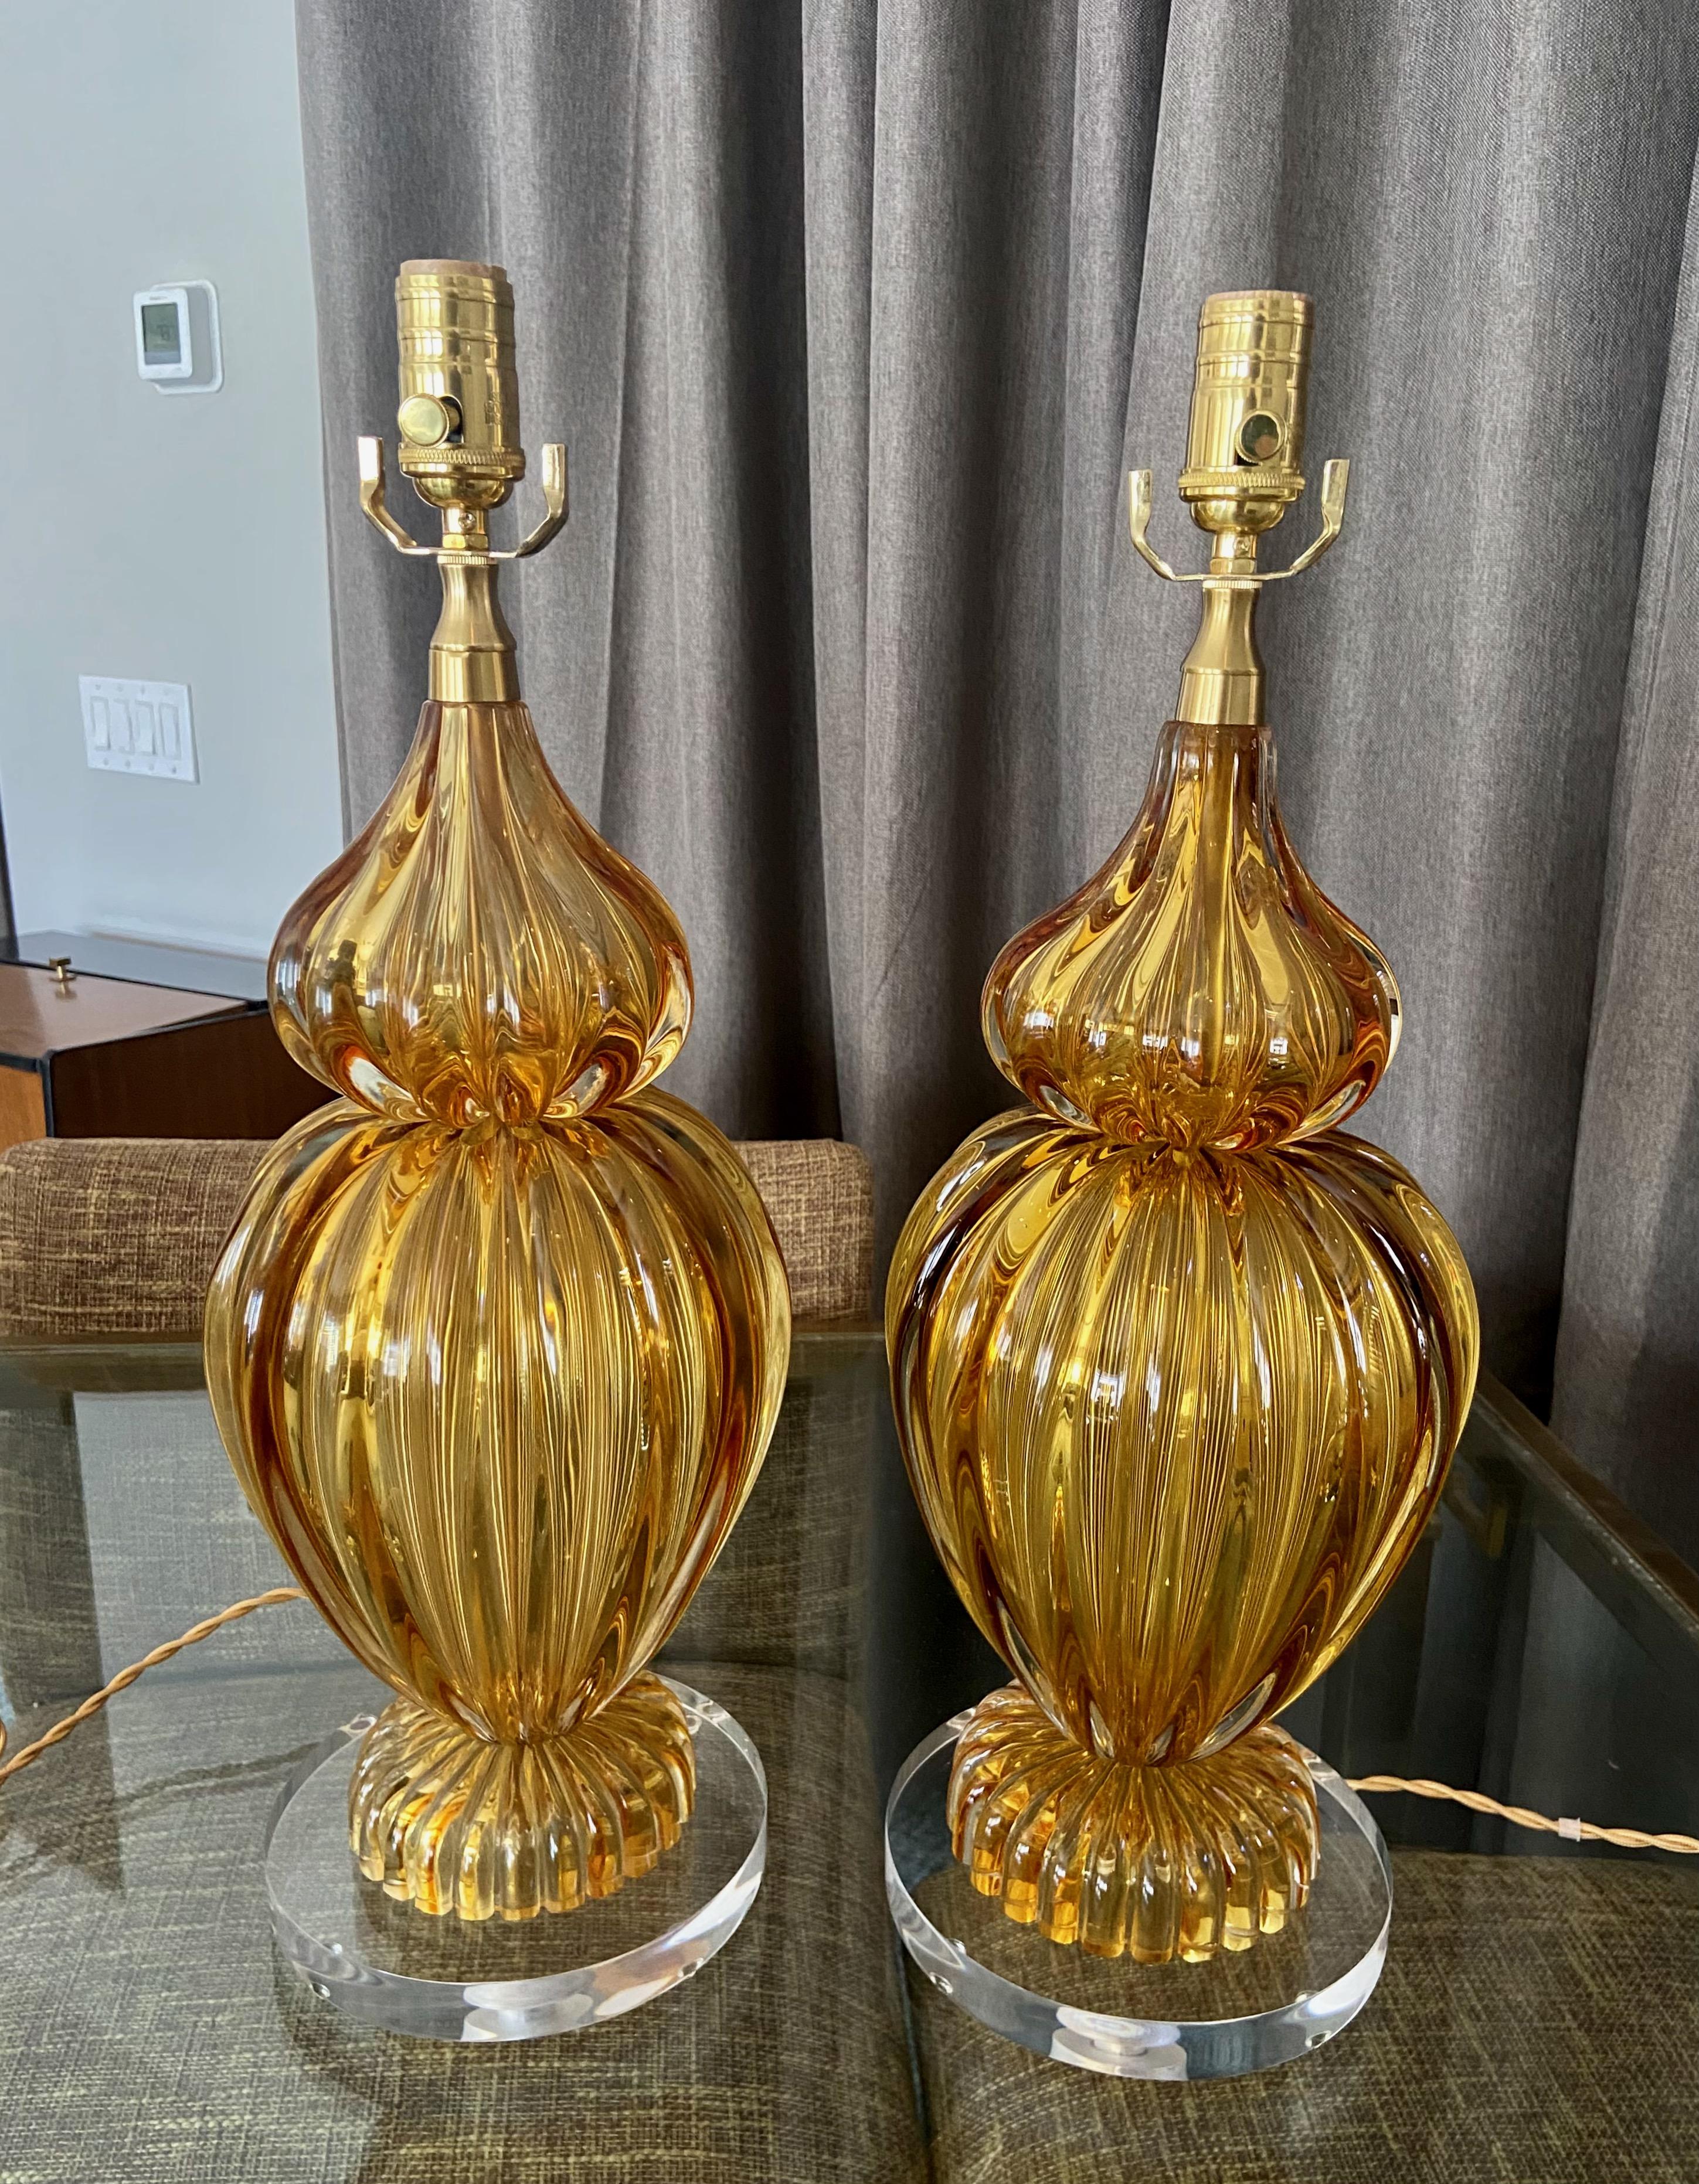 Pair of Seguso Italian Murano handblown amber ribbed glass table lamps. Glass has a rich golden amber color with each lamp weighs over 14 pounds. 
mounted on newer custom acrylic bases. Each newly wired, including new 3 way brass sockets and french